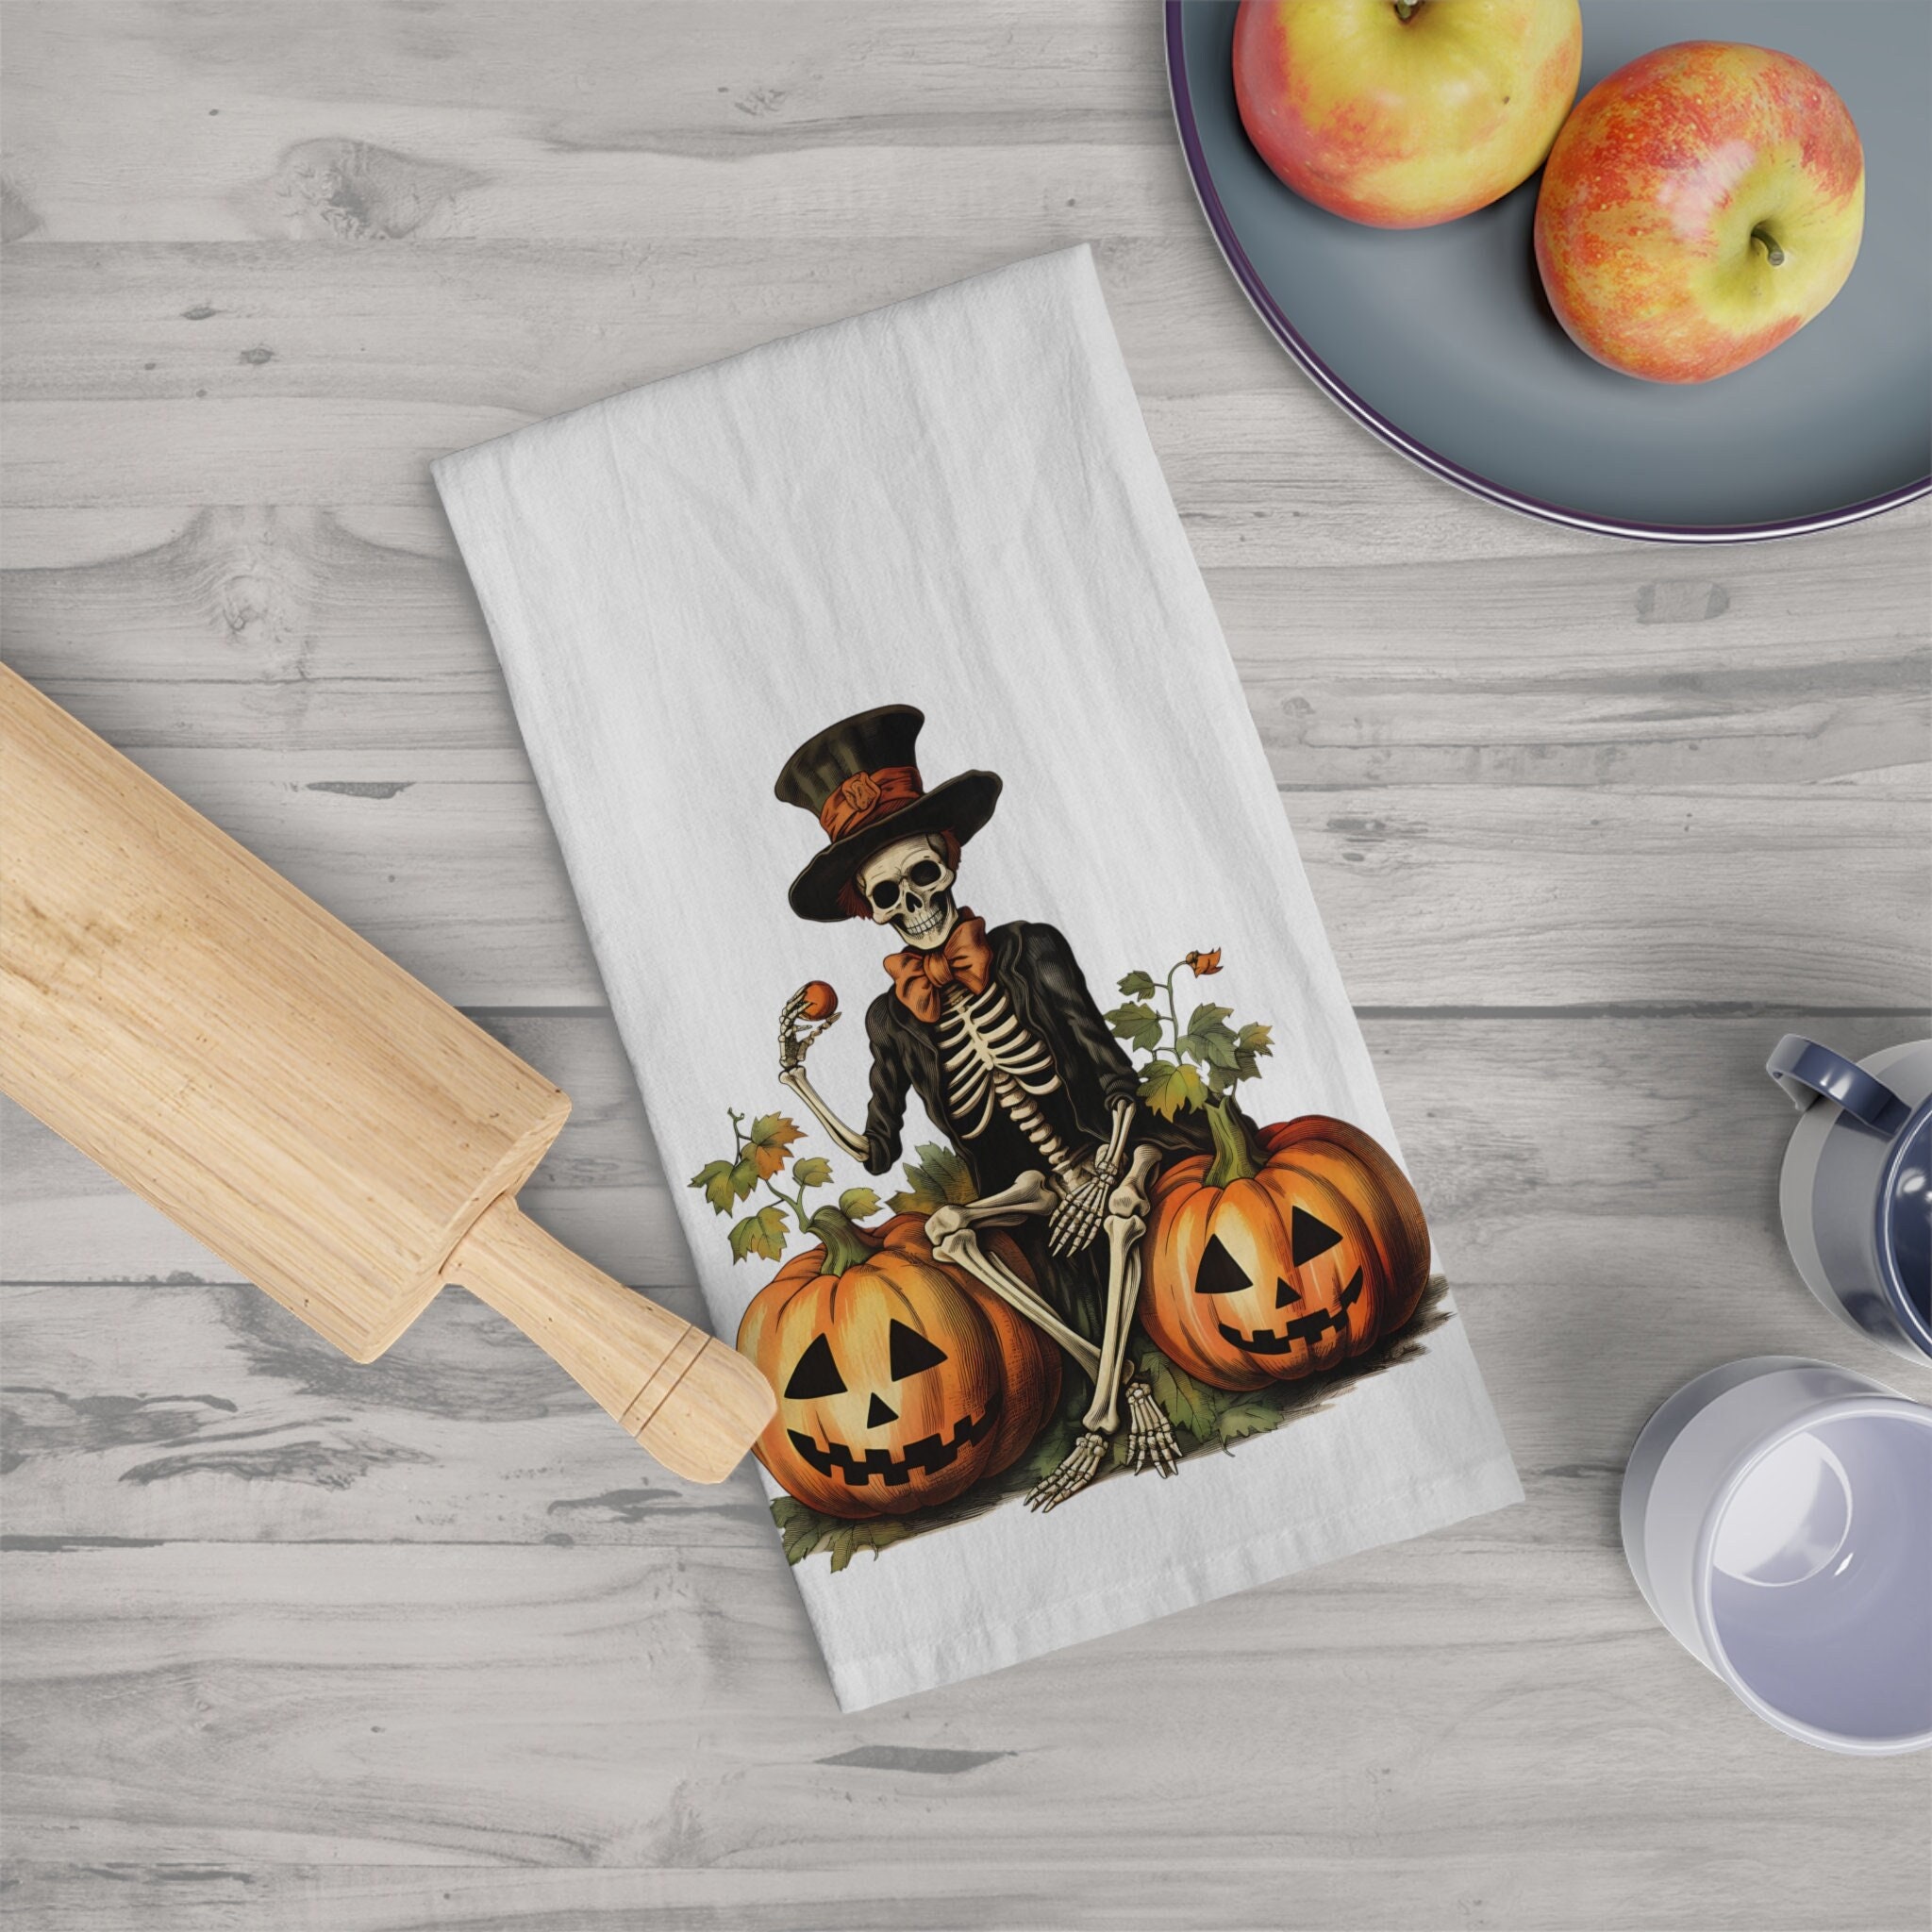  Voatok Dark Memento Mori The Undead Gothic Macabre Art Kitchen  Towels Dish Towels Set of 4,Gothic Skull Halloween Kitchen Hand Towels,Skull  Lovers Gifts,Tarot Lovers Gifts : Home & Kitchen